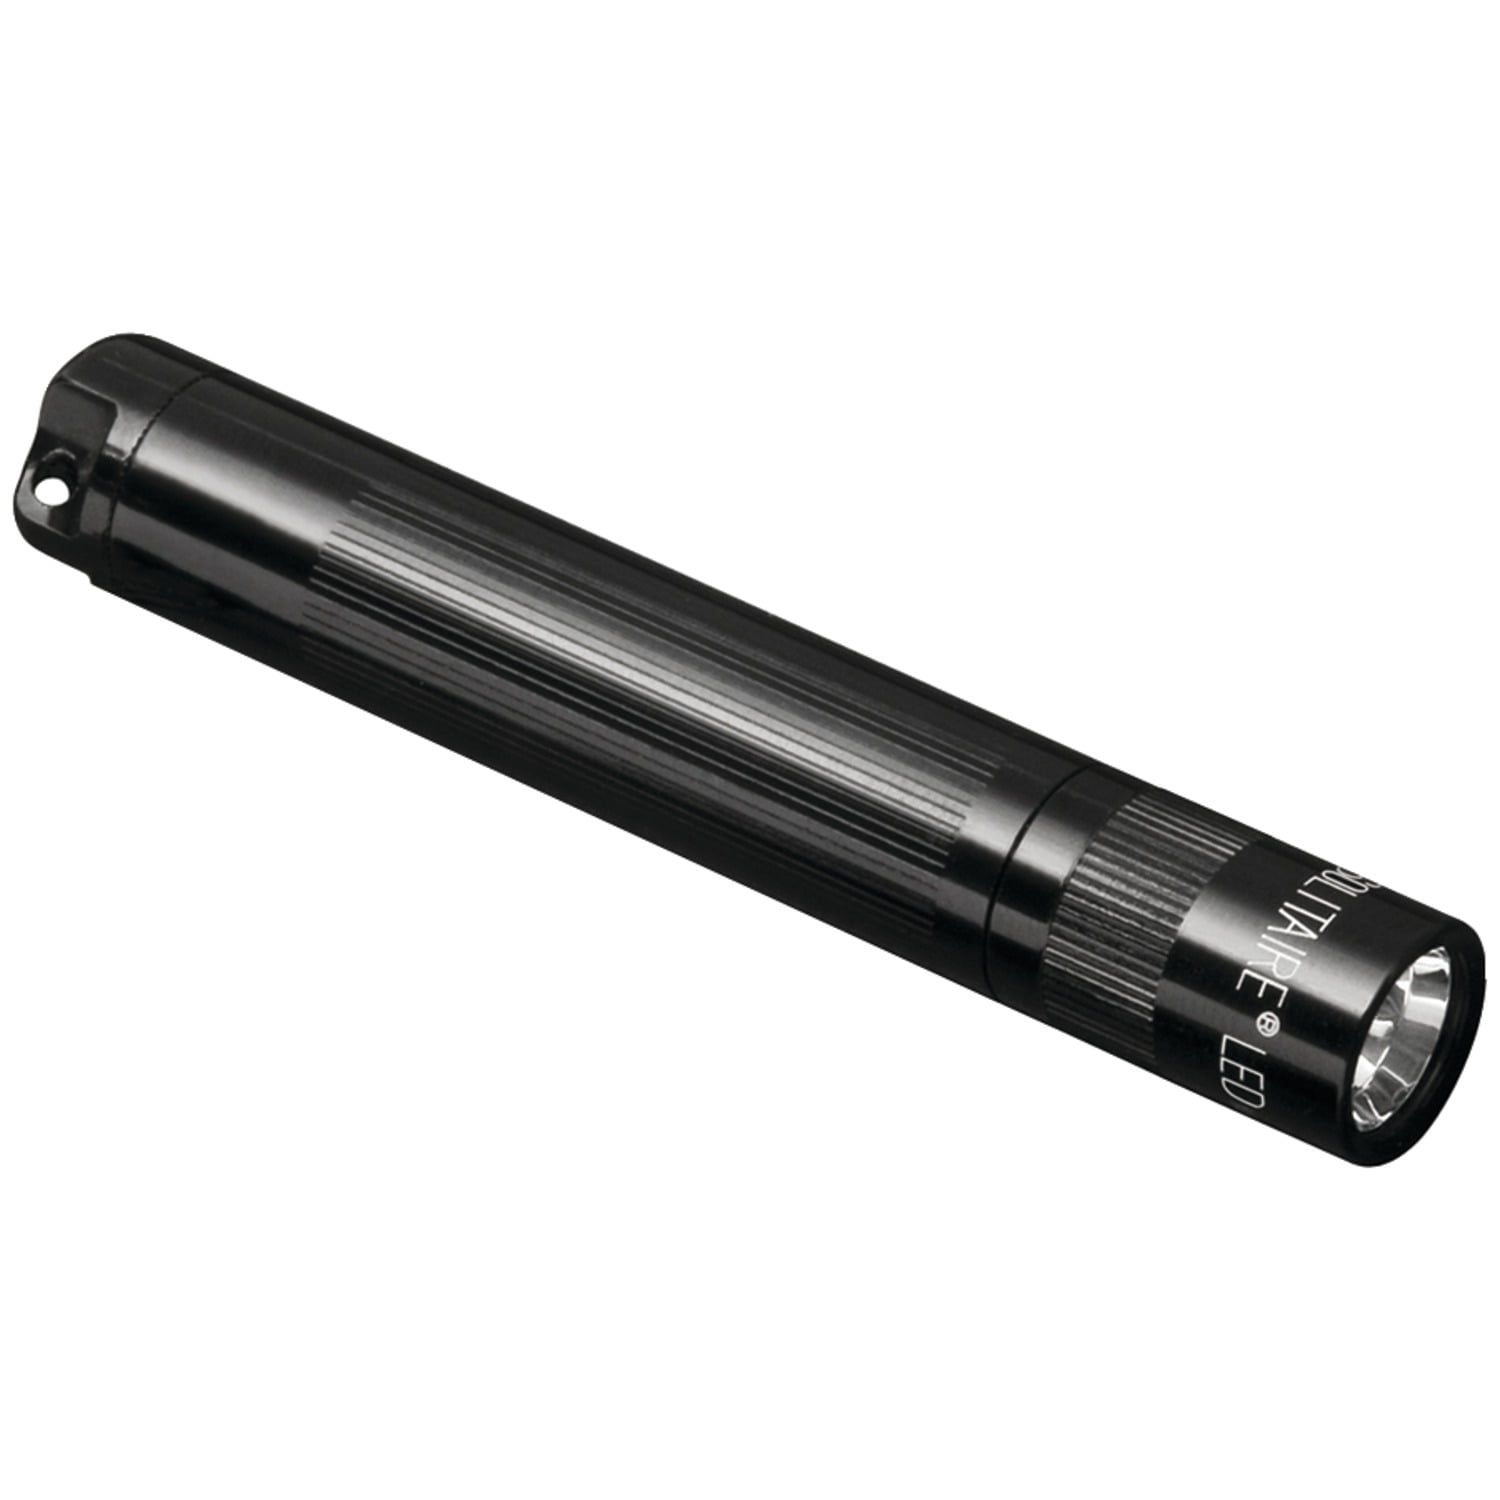 Maglite AAA Solitaire Black  maglight  mag-lite   mag-light